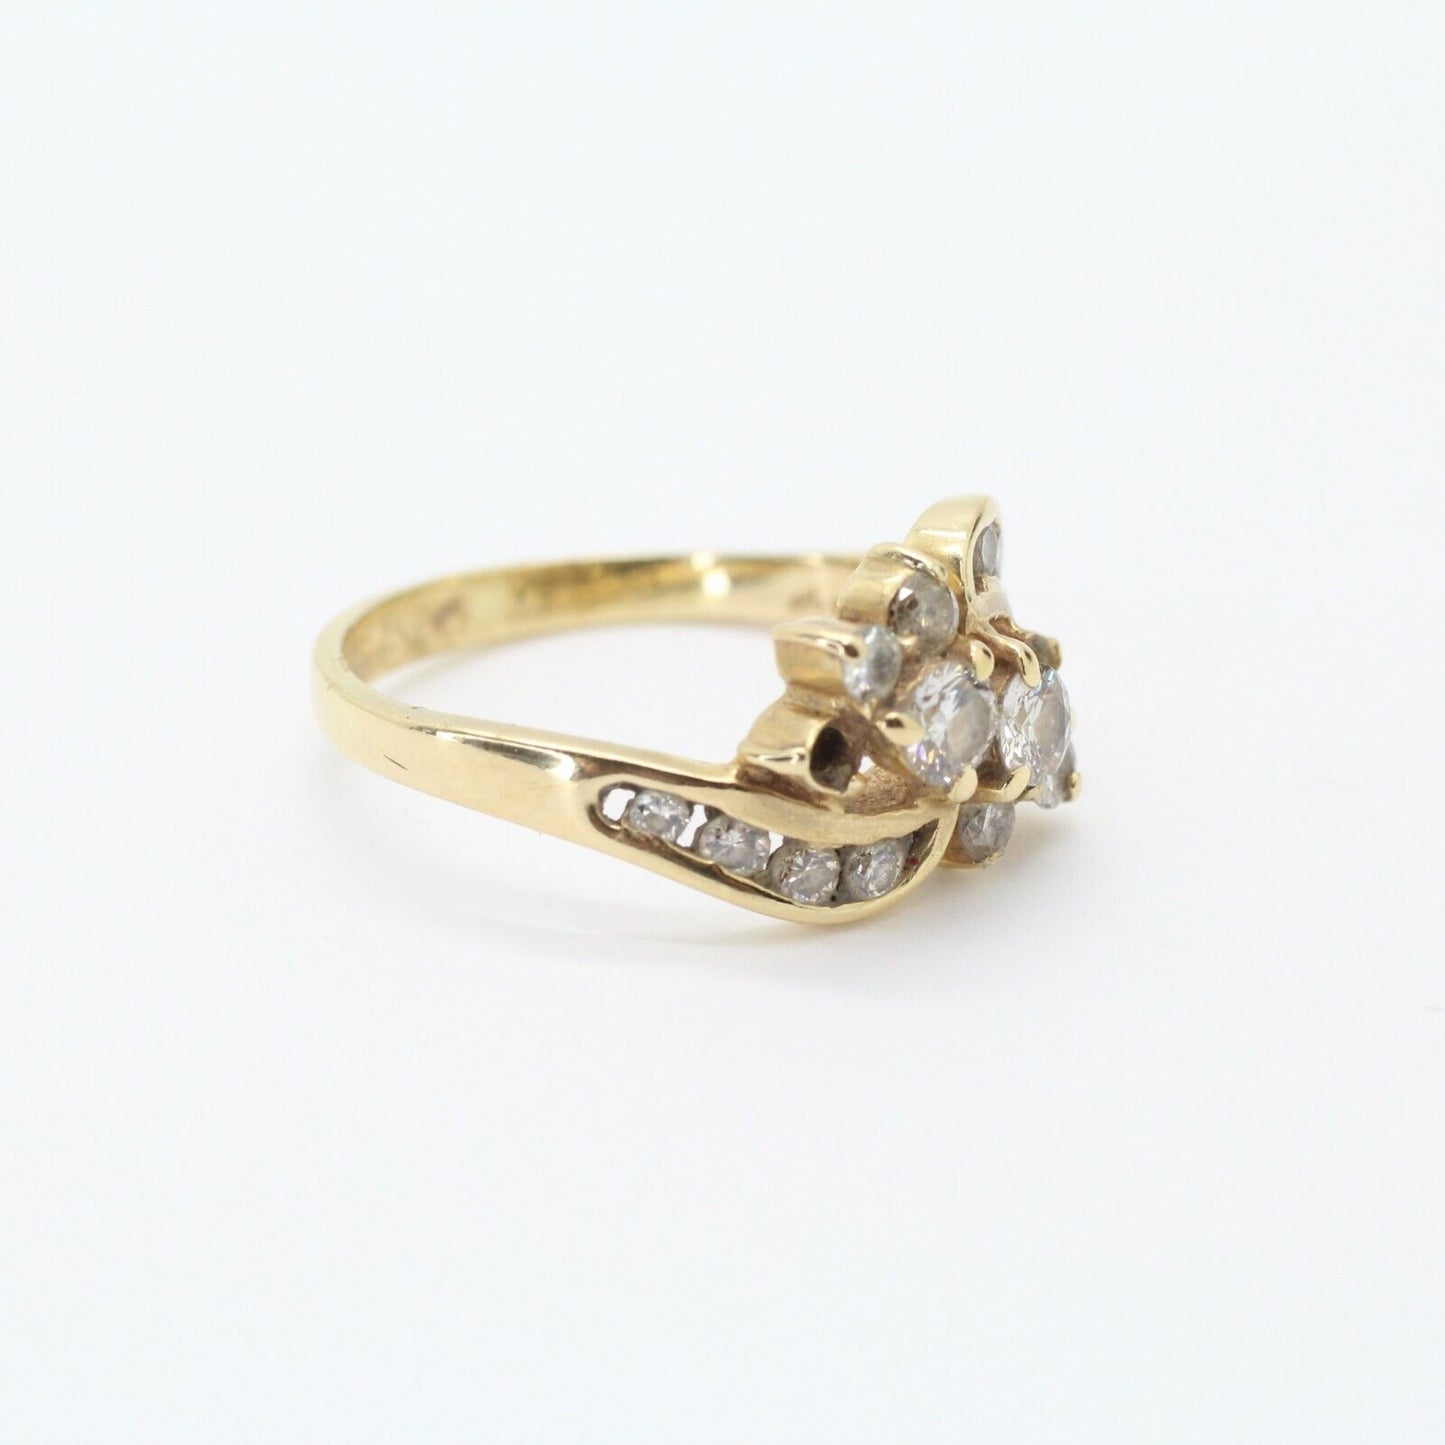 Vintage Round Diamonds Cluster Ring in 14k Yellow Gold 8us